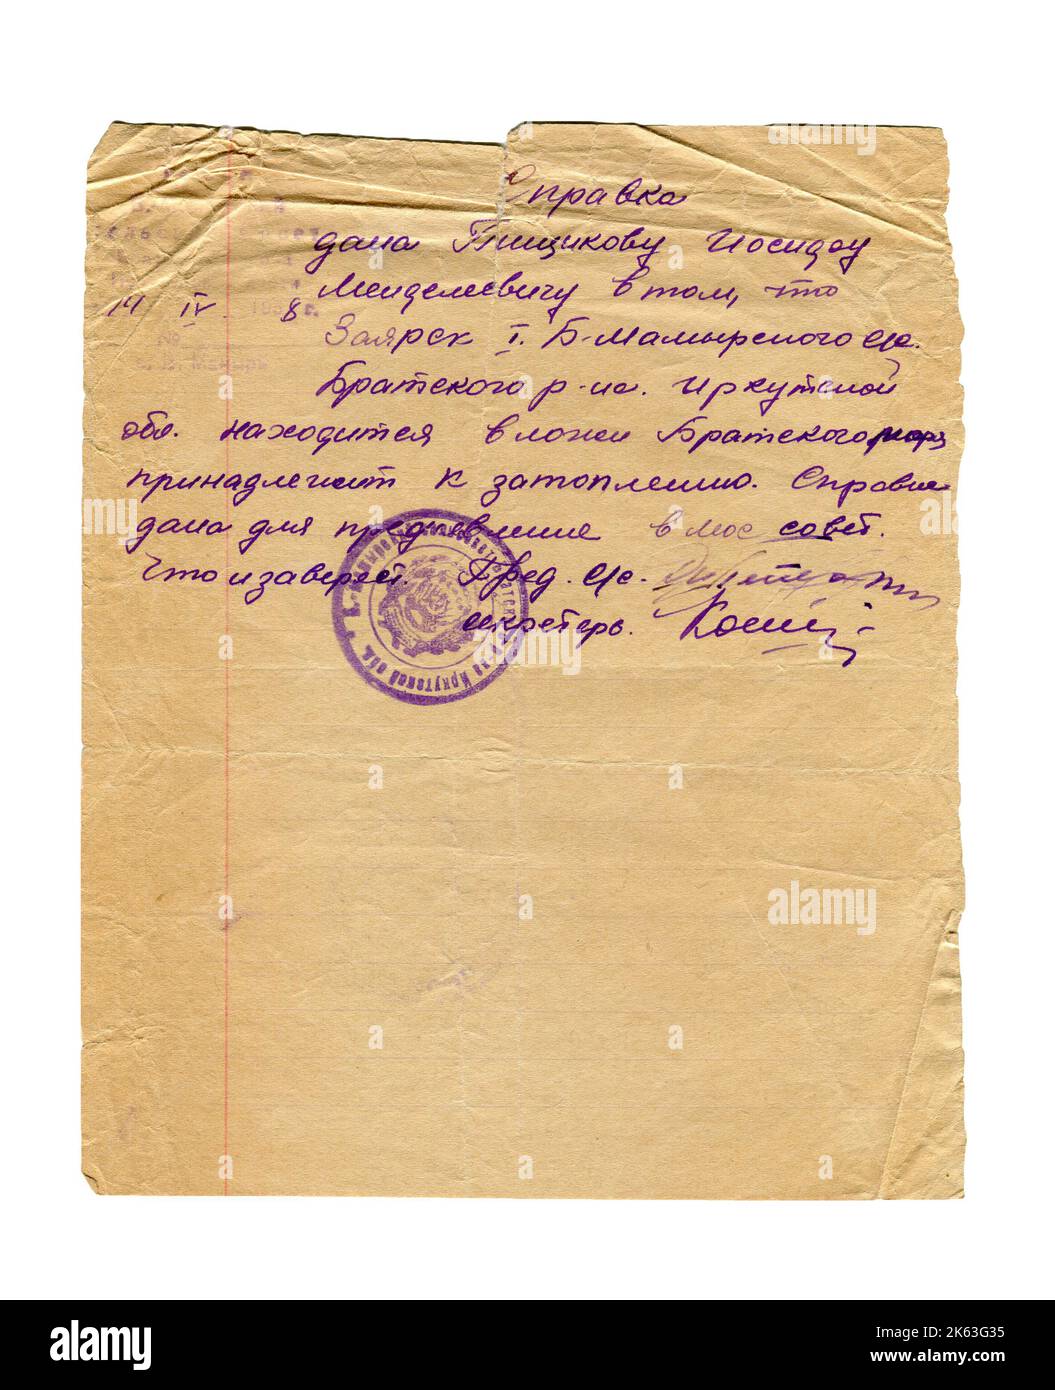 Archive of Pishchikov Iosif Mendeleevich (Russian: Пищиков Иосиф Менделеевич), born in 1905, a native of the town of Pochep, Oryol region. Jewish nationality, convicted by the Military Tribunal of the Kharkov Military District on August 11, 1937 under Articles 54-11,17-54-8 and 54-10 of the Criminal Code of the Ukrainian SSR to imprisonment for ten years. Stock Photo